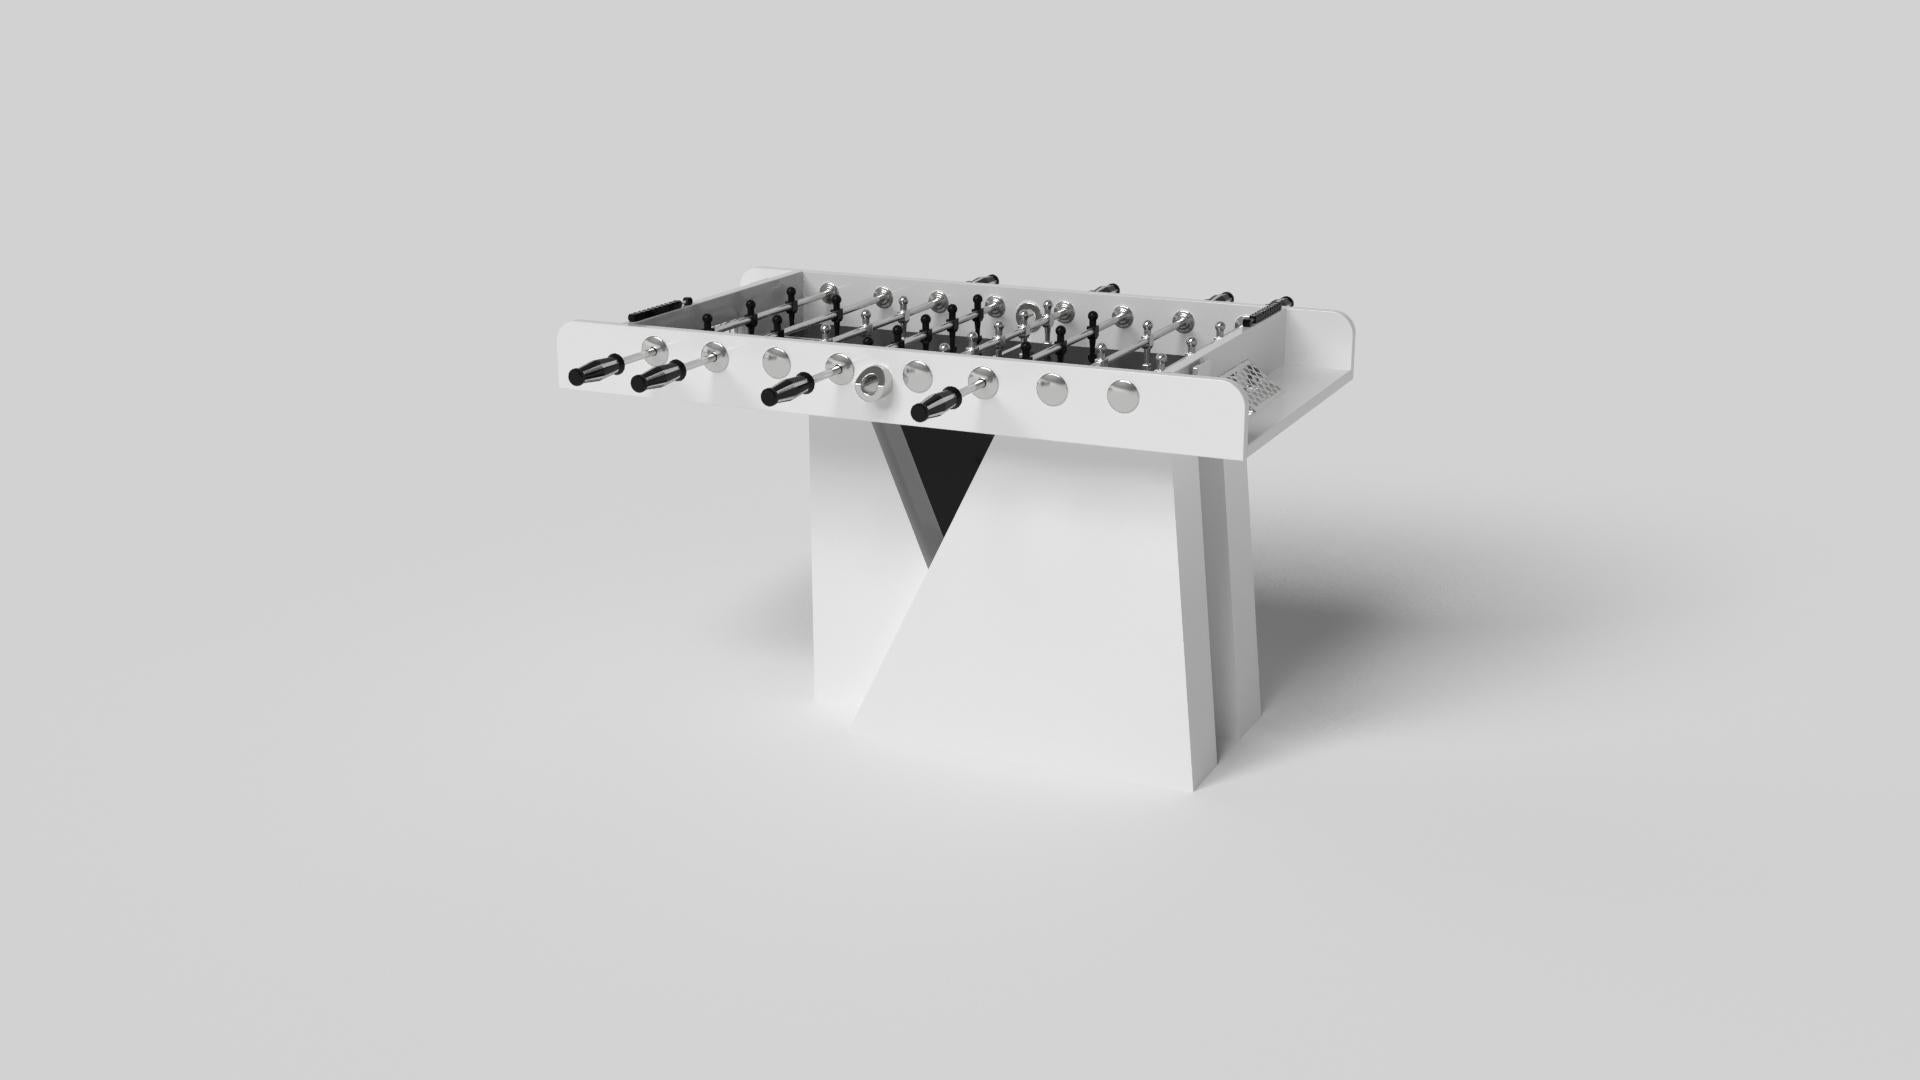 An asymmetric base creates a free-floating silhouette, making the Stilt foosball table in chrome with walnut a compelling, contemporary addition to the modern home. Crafted from durable metal with solid walnut wood accents, this luxury handcrafted